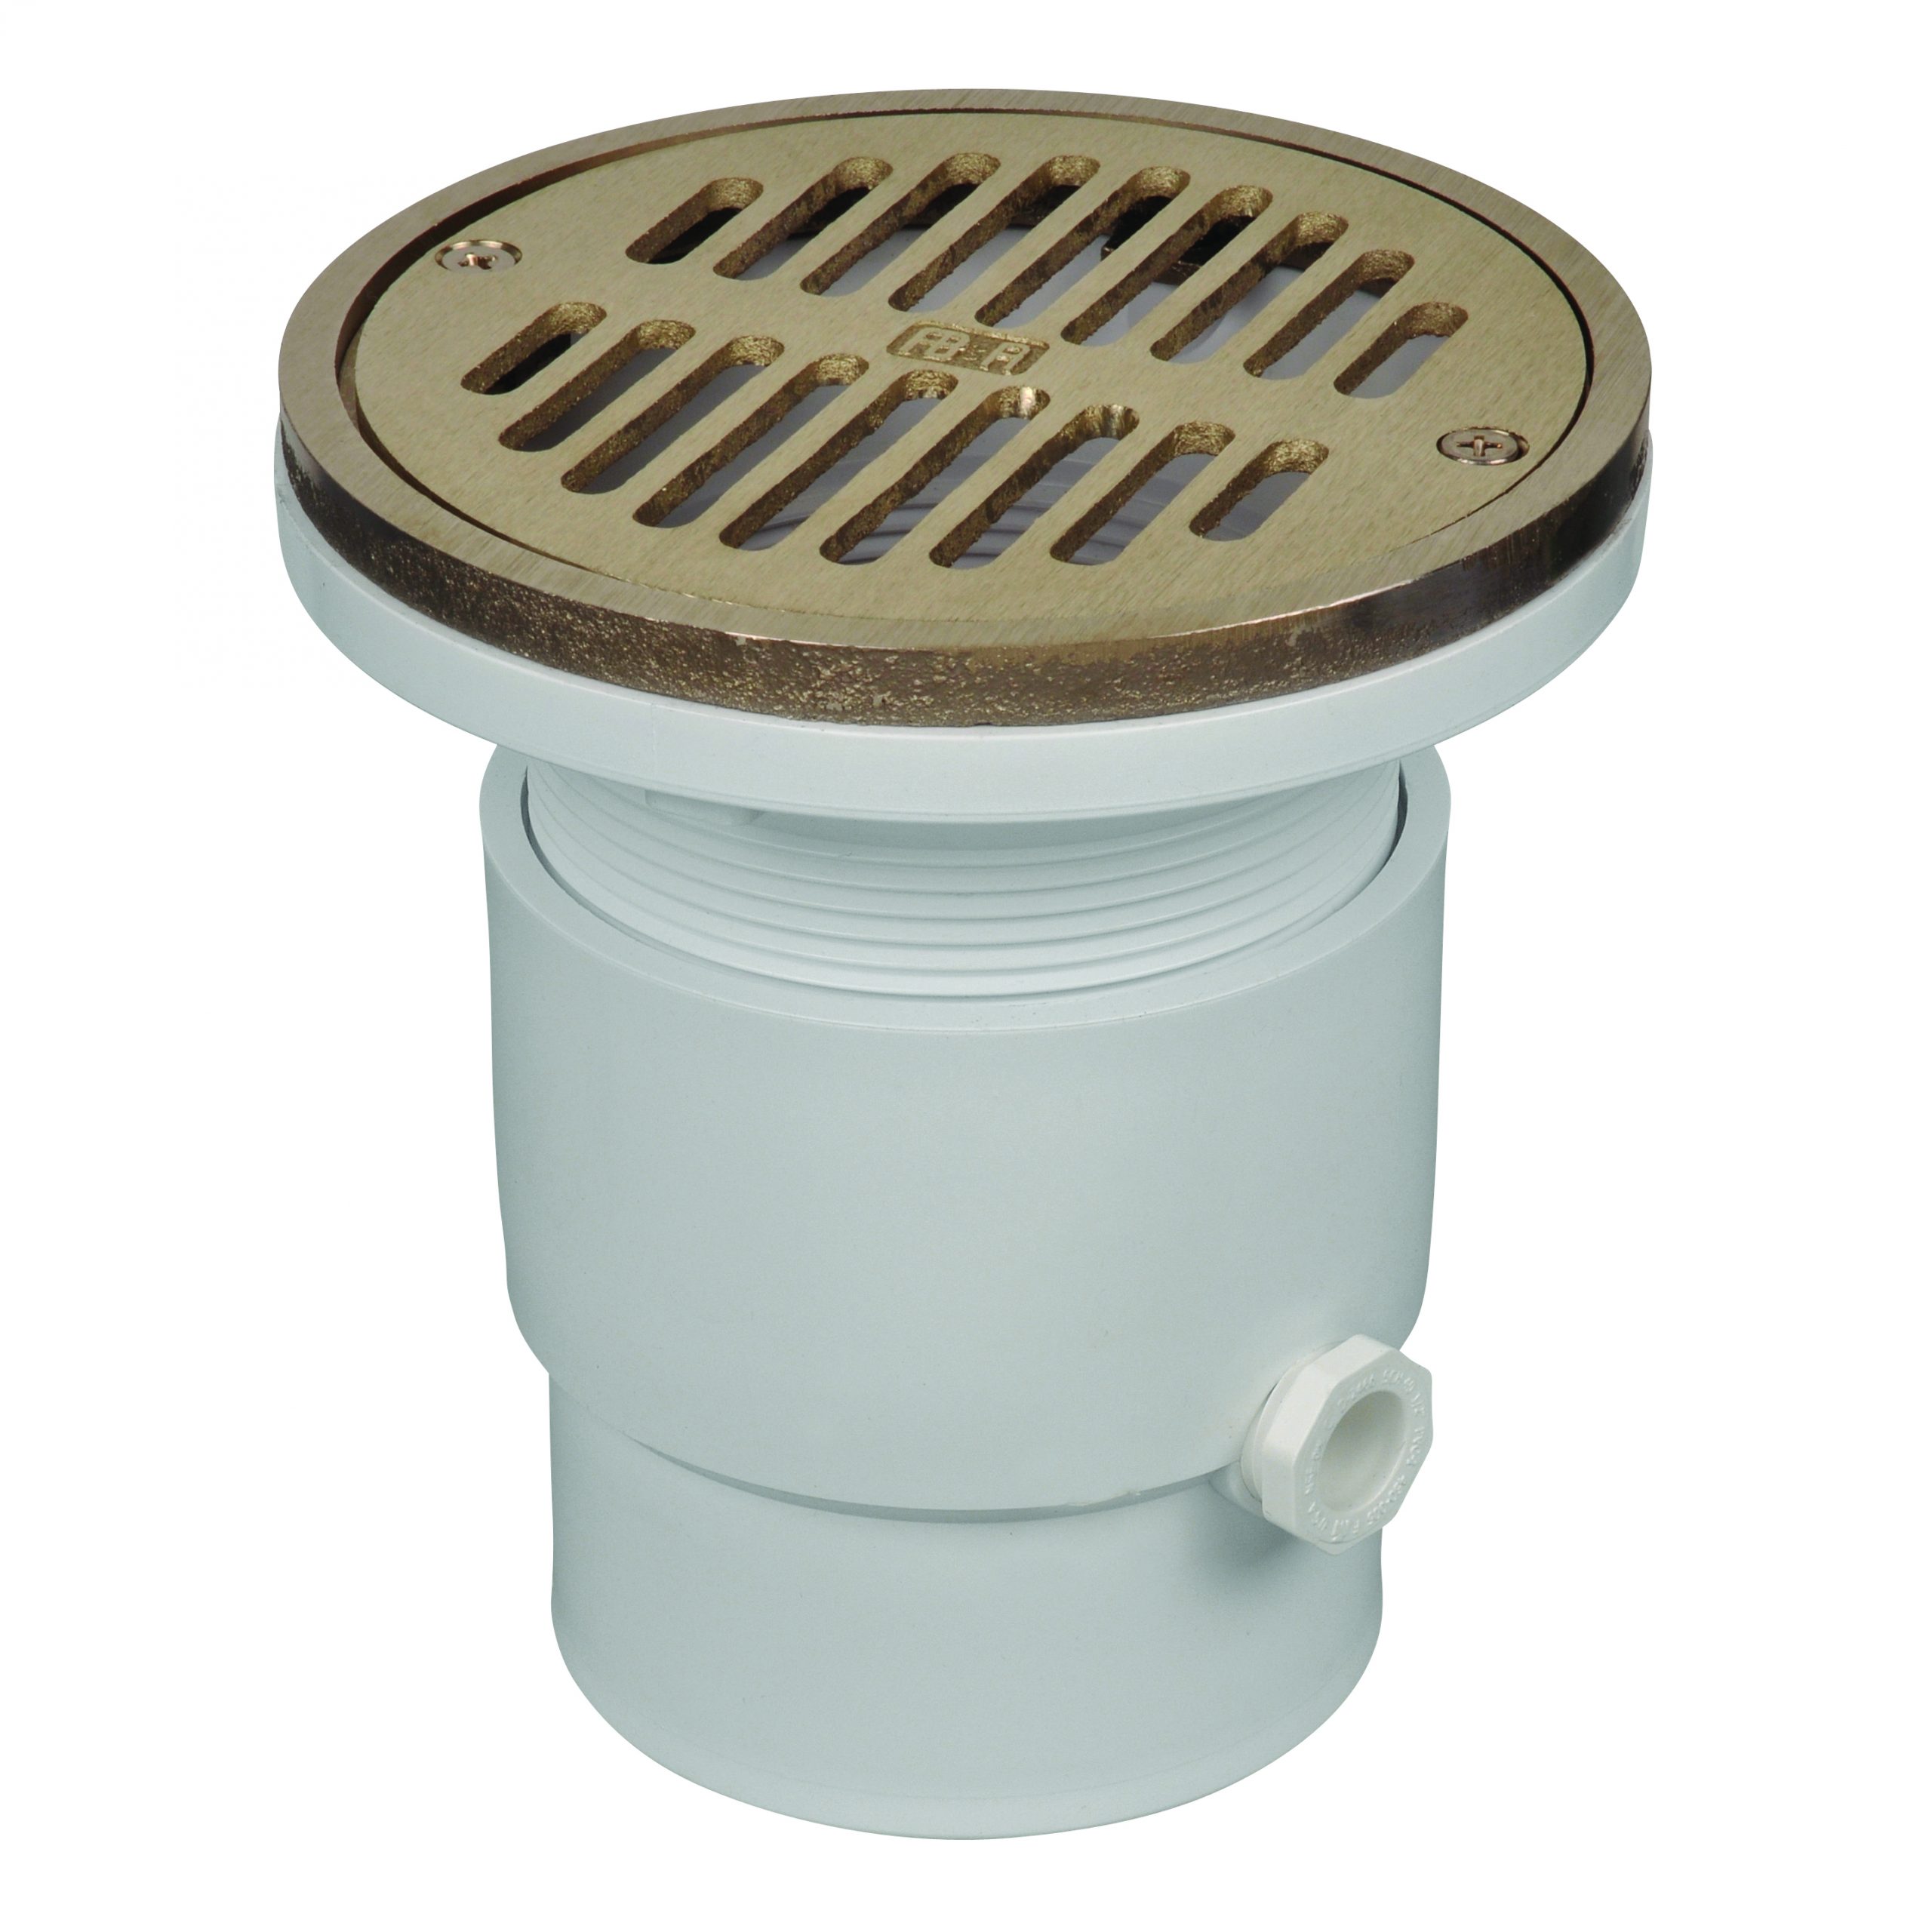 The Drain Strainer Crown Adapter - Protect Commercial Sink Drains